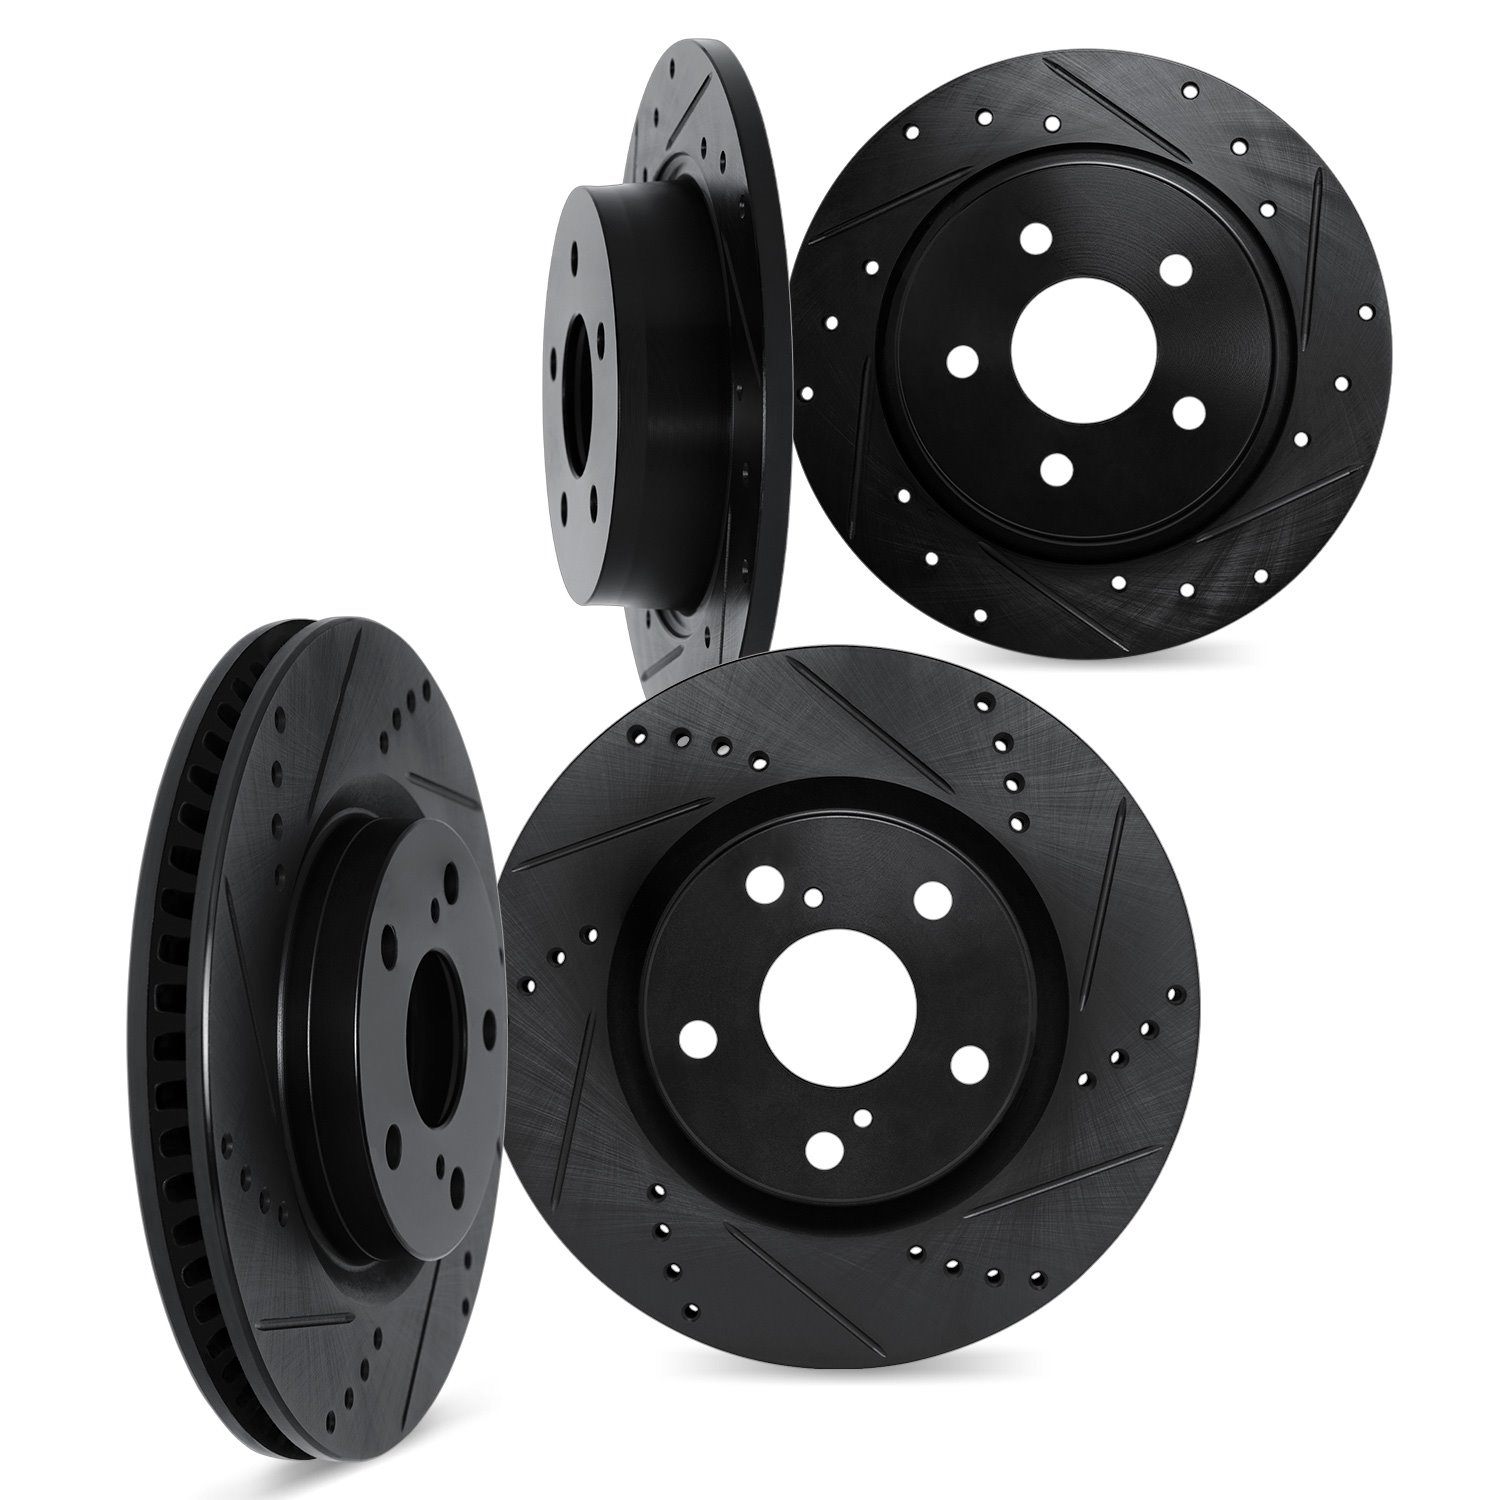 8004-42024 Drilled/Slotted Brake Rotors [Black], Fits Select Mopar, Position: Front and Rear